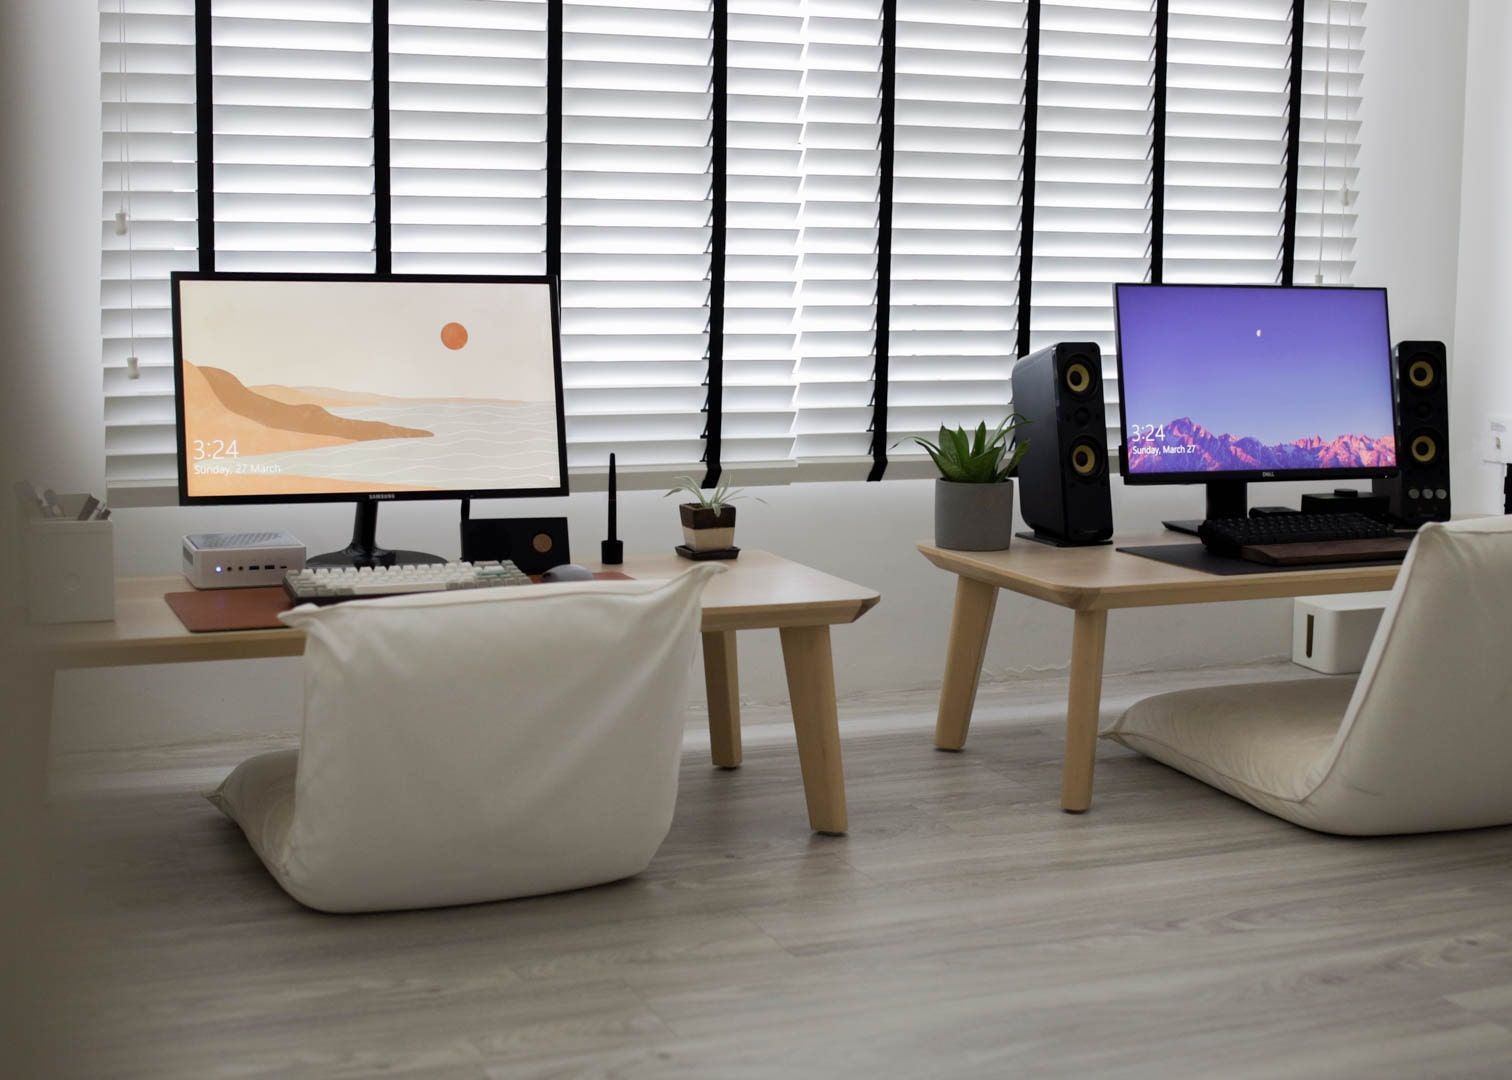 A minimalist workspace with a Japanese aesthetic, featuring dual monitors on wooden stands, floor chairs, and a peaceful atmosphere accentuated by natural light